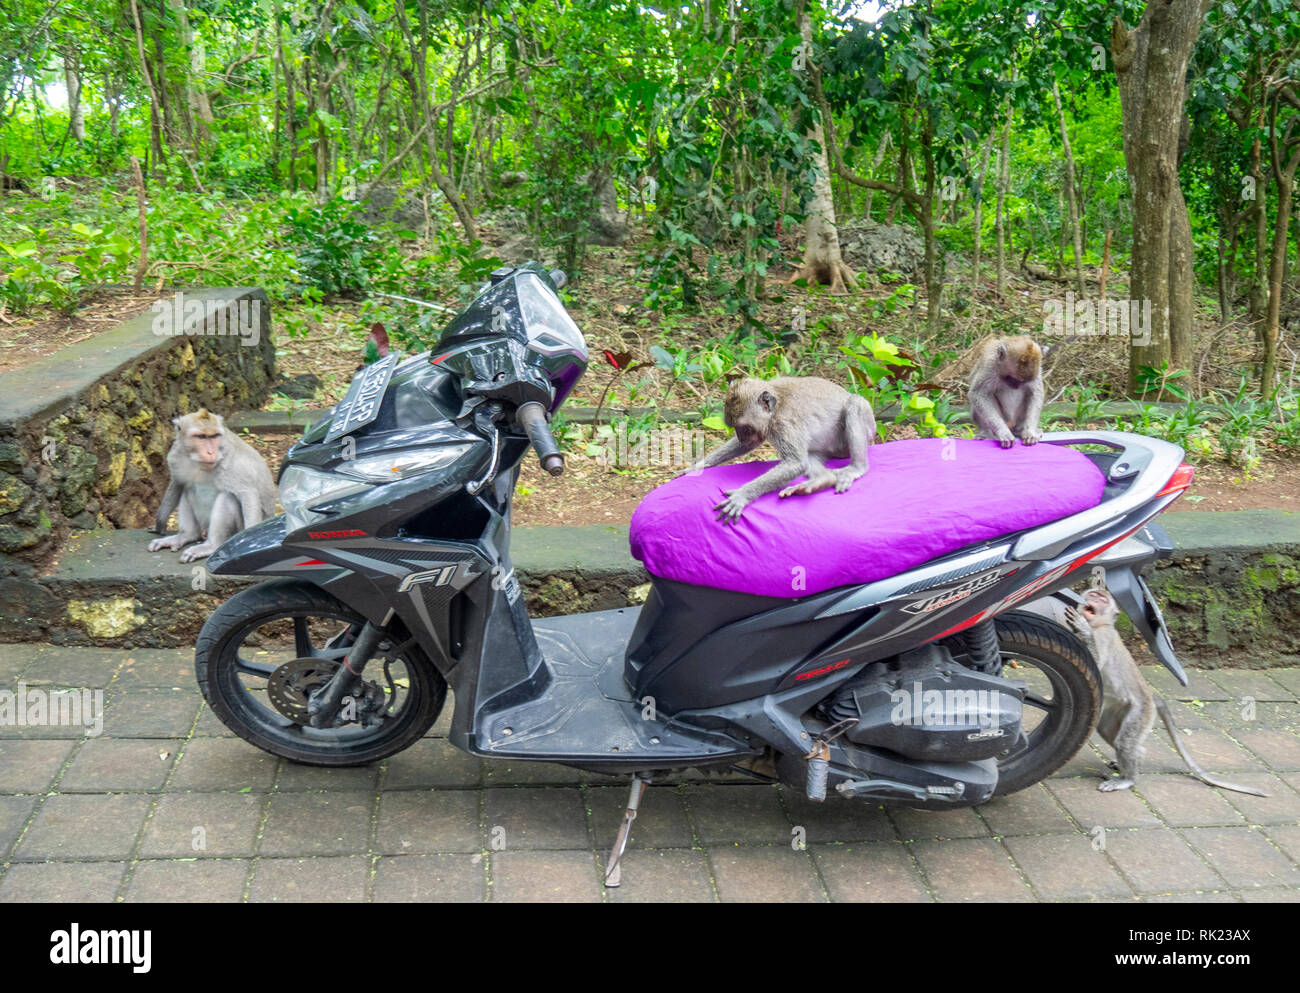 Macaque monkeys Macaca Fascicularis playing on a motorcycle at Uluwatu Temple Bali Indonesia. Stock Photo